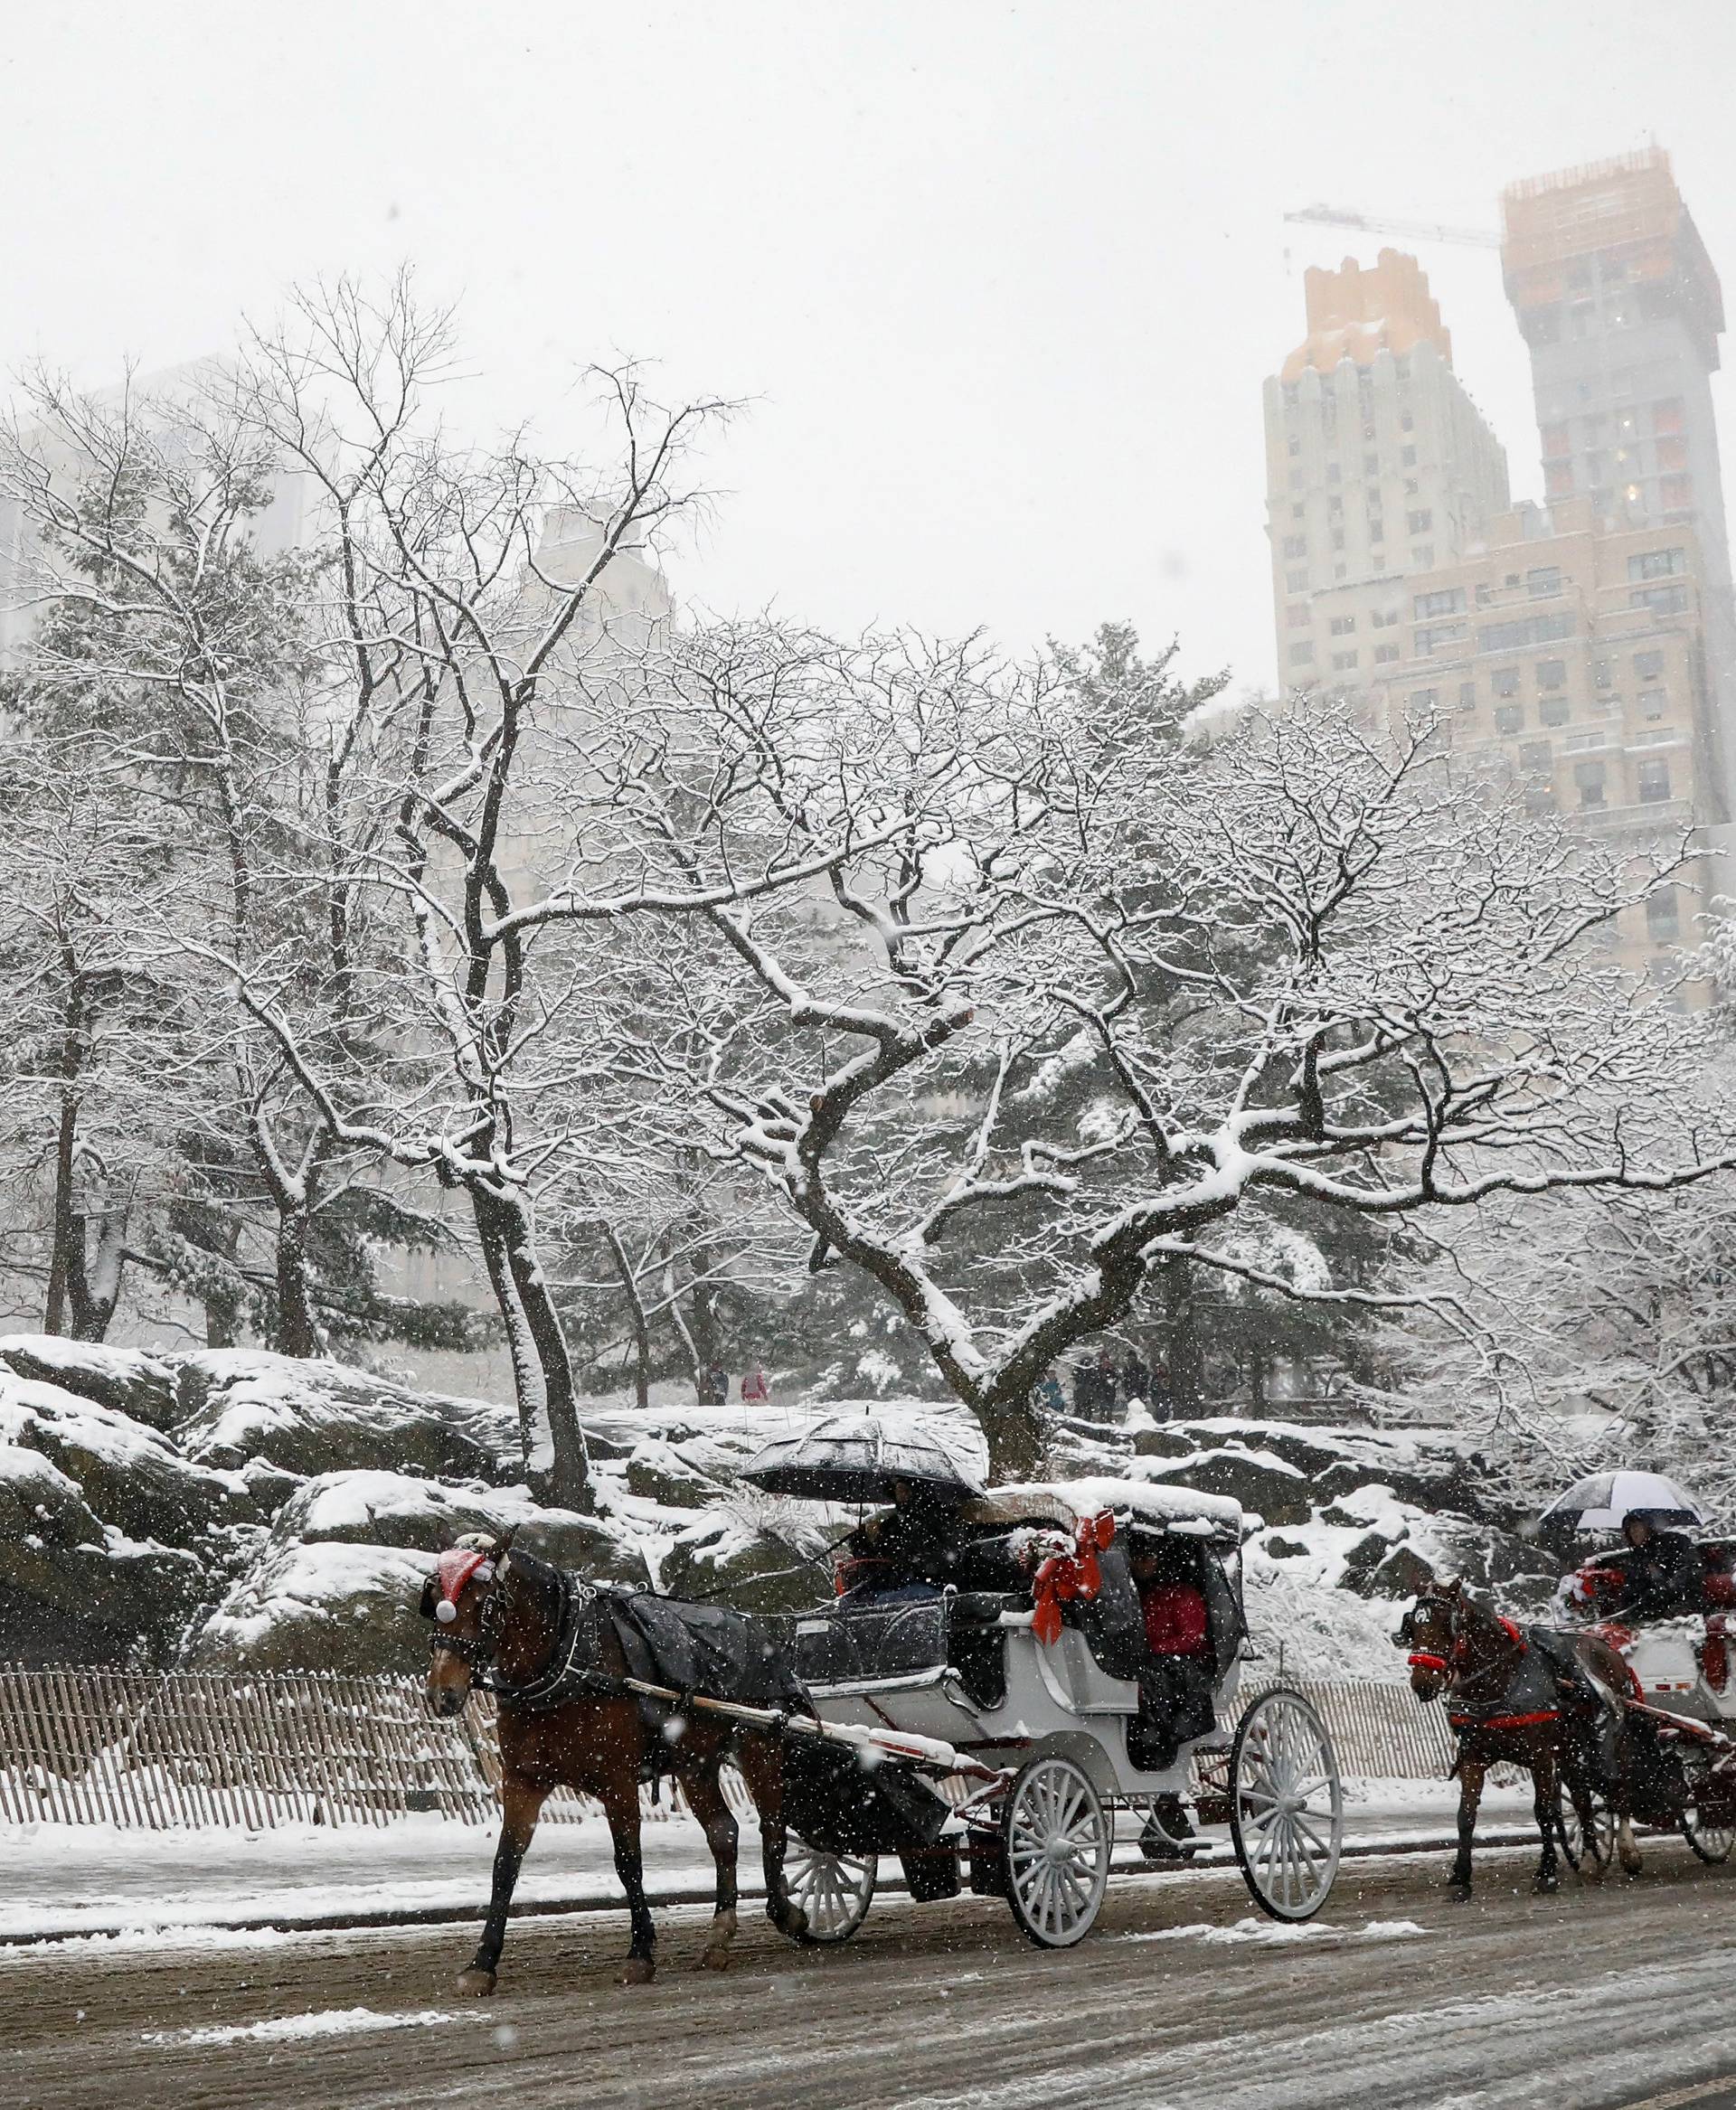 Horses pull carriages through Central Park as the snow falls during a pre-winter storm in New York